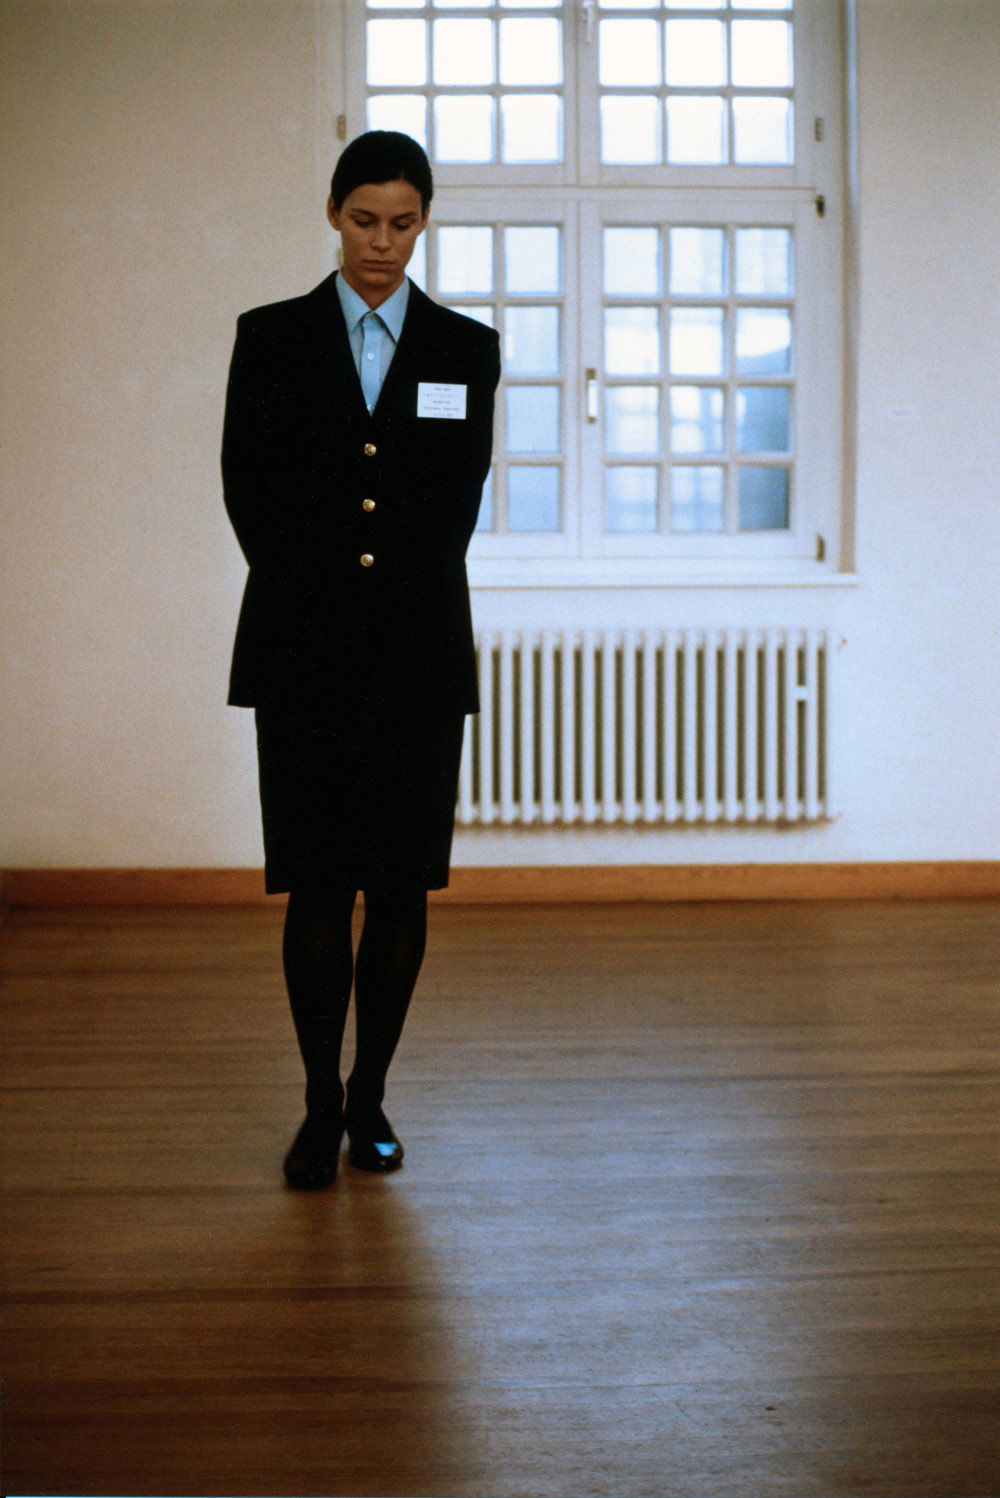 Art, artwork. A performance Ready-made entitled "Waiting Room" by Nika Span / Nika Špan. Material: A guard’s uniform with a label. Exhibition: Eller-Bahnhof 1, Eller Railway station, Duesseldorf, Germany.